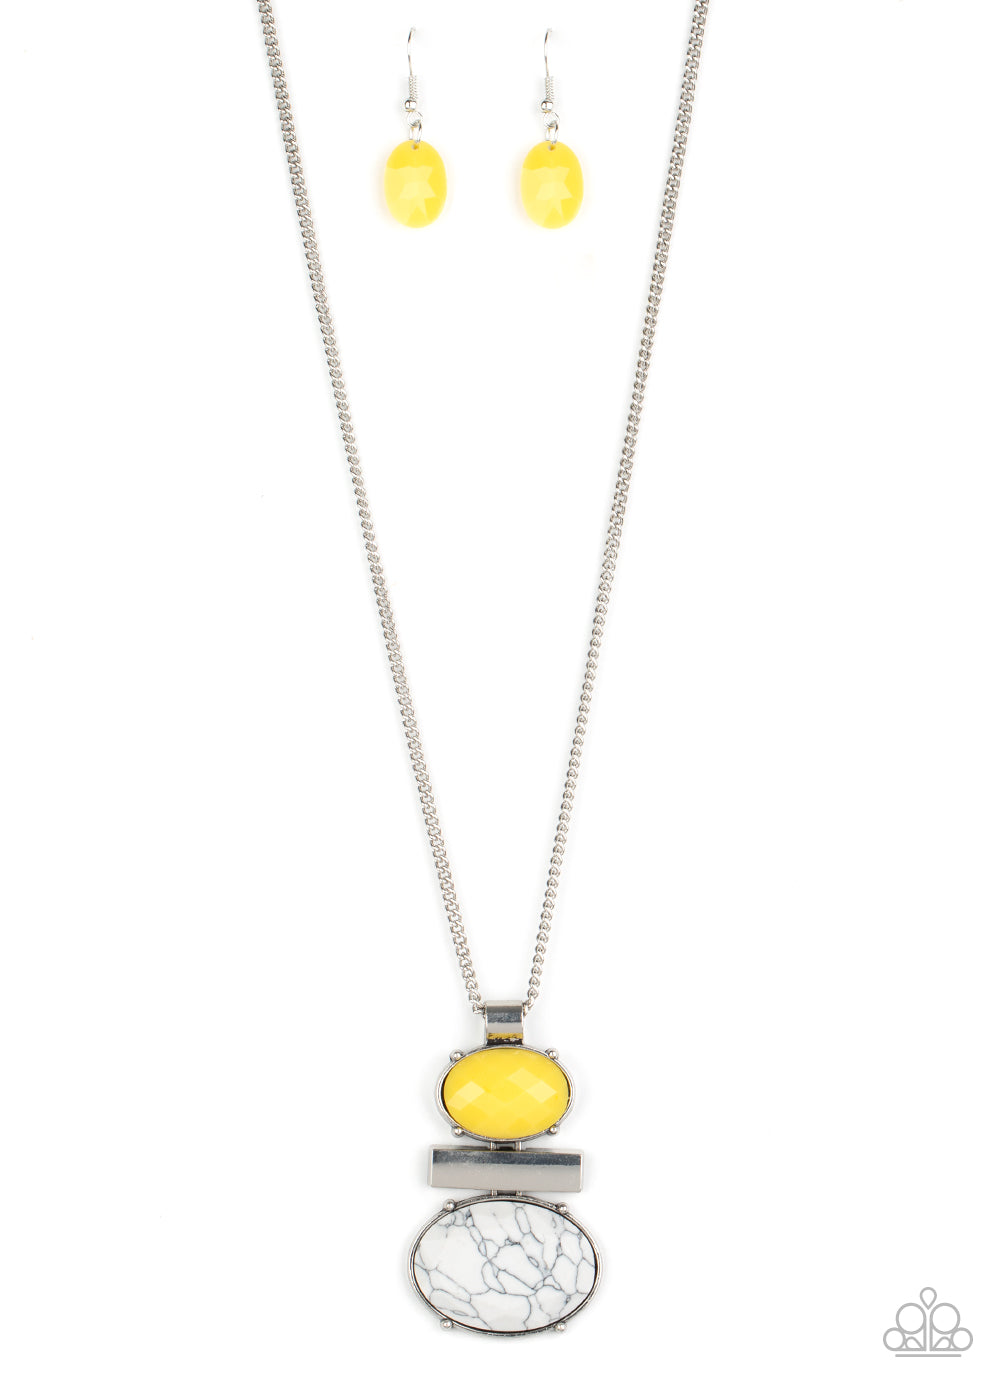 Finding Balance Necklace - Yellow